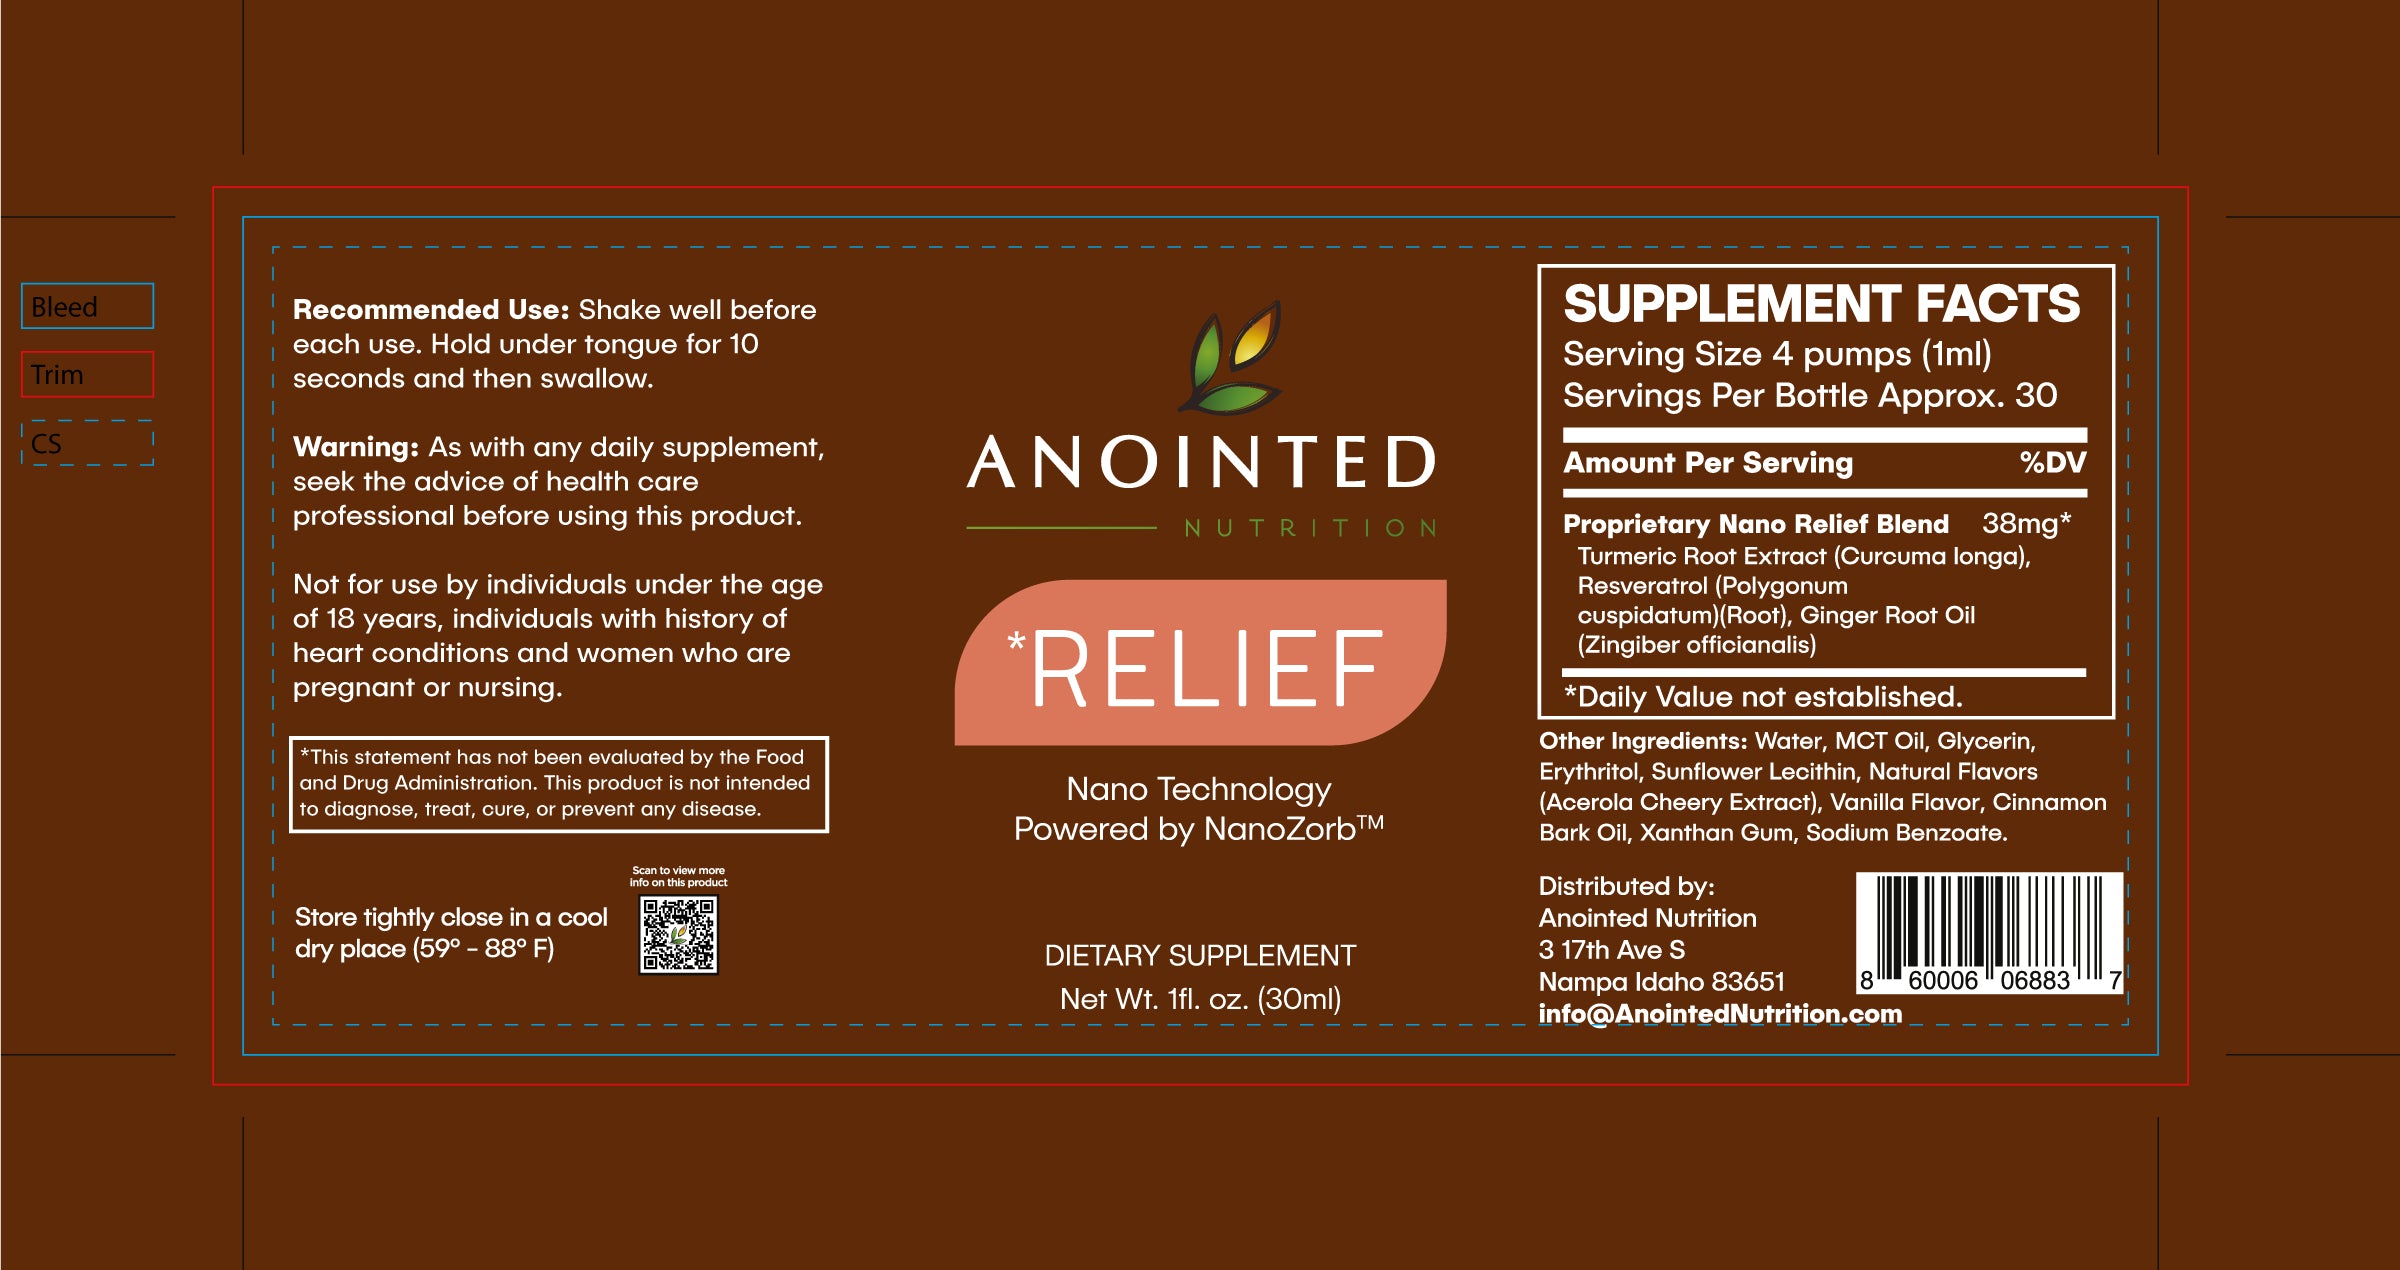 Anointed Nutrition Relief